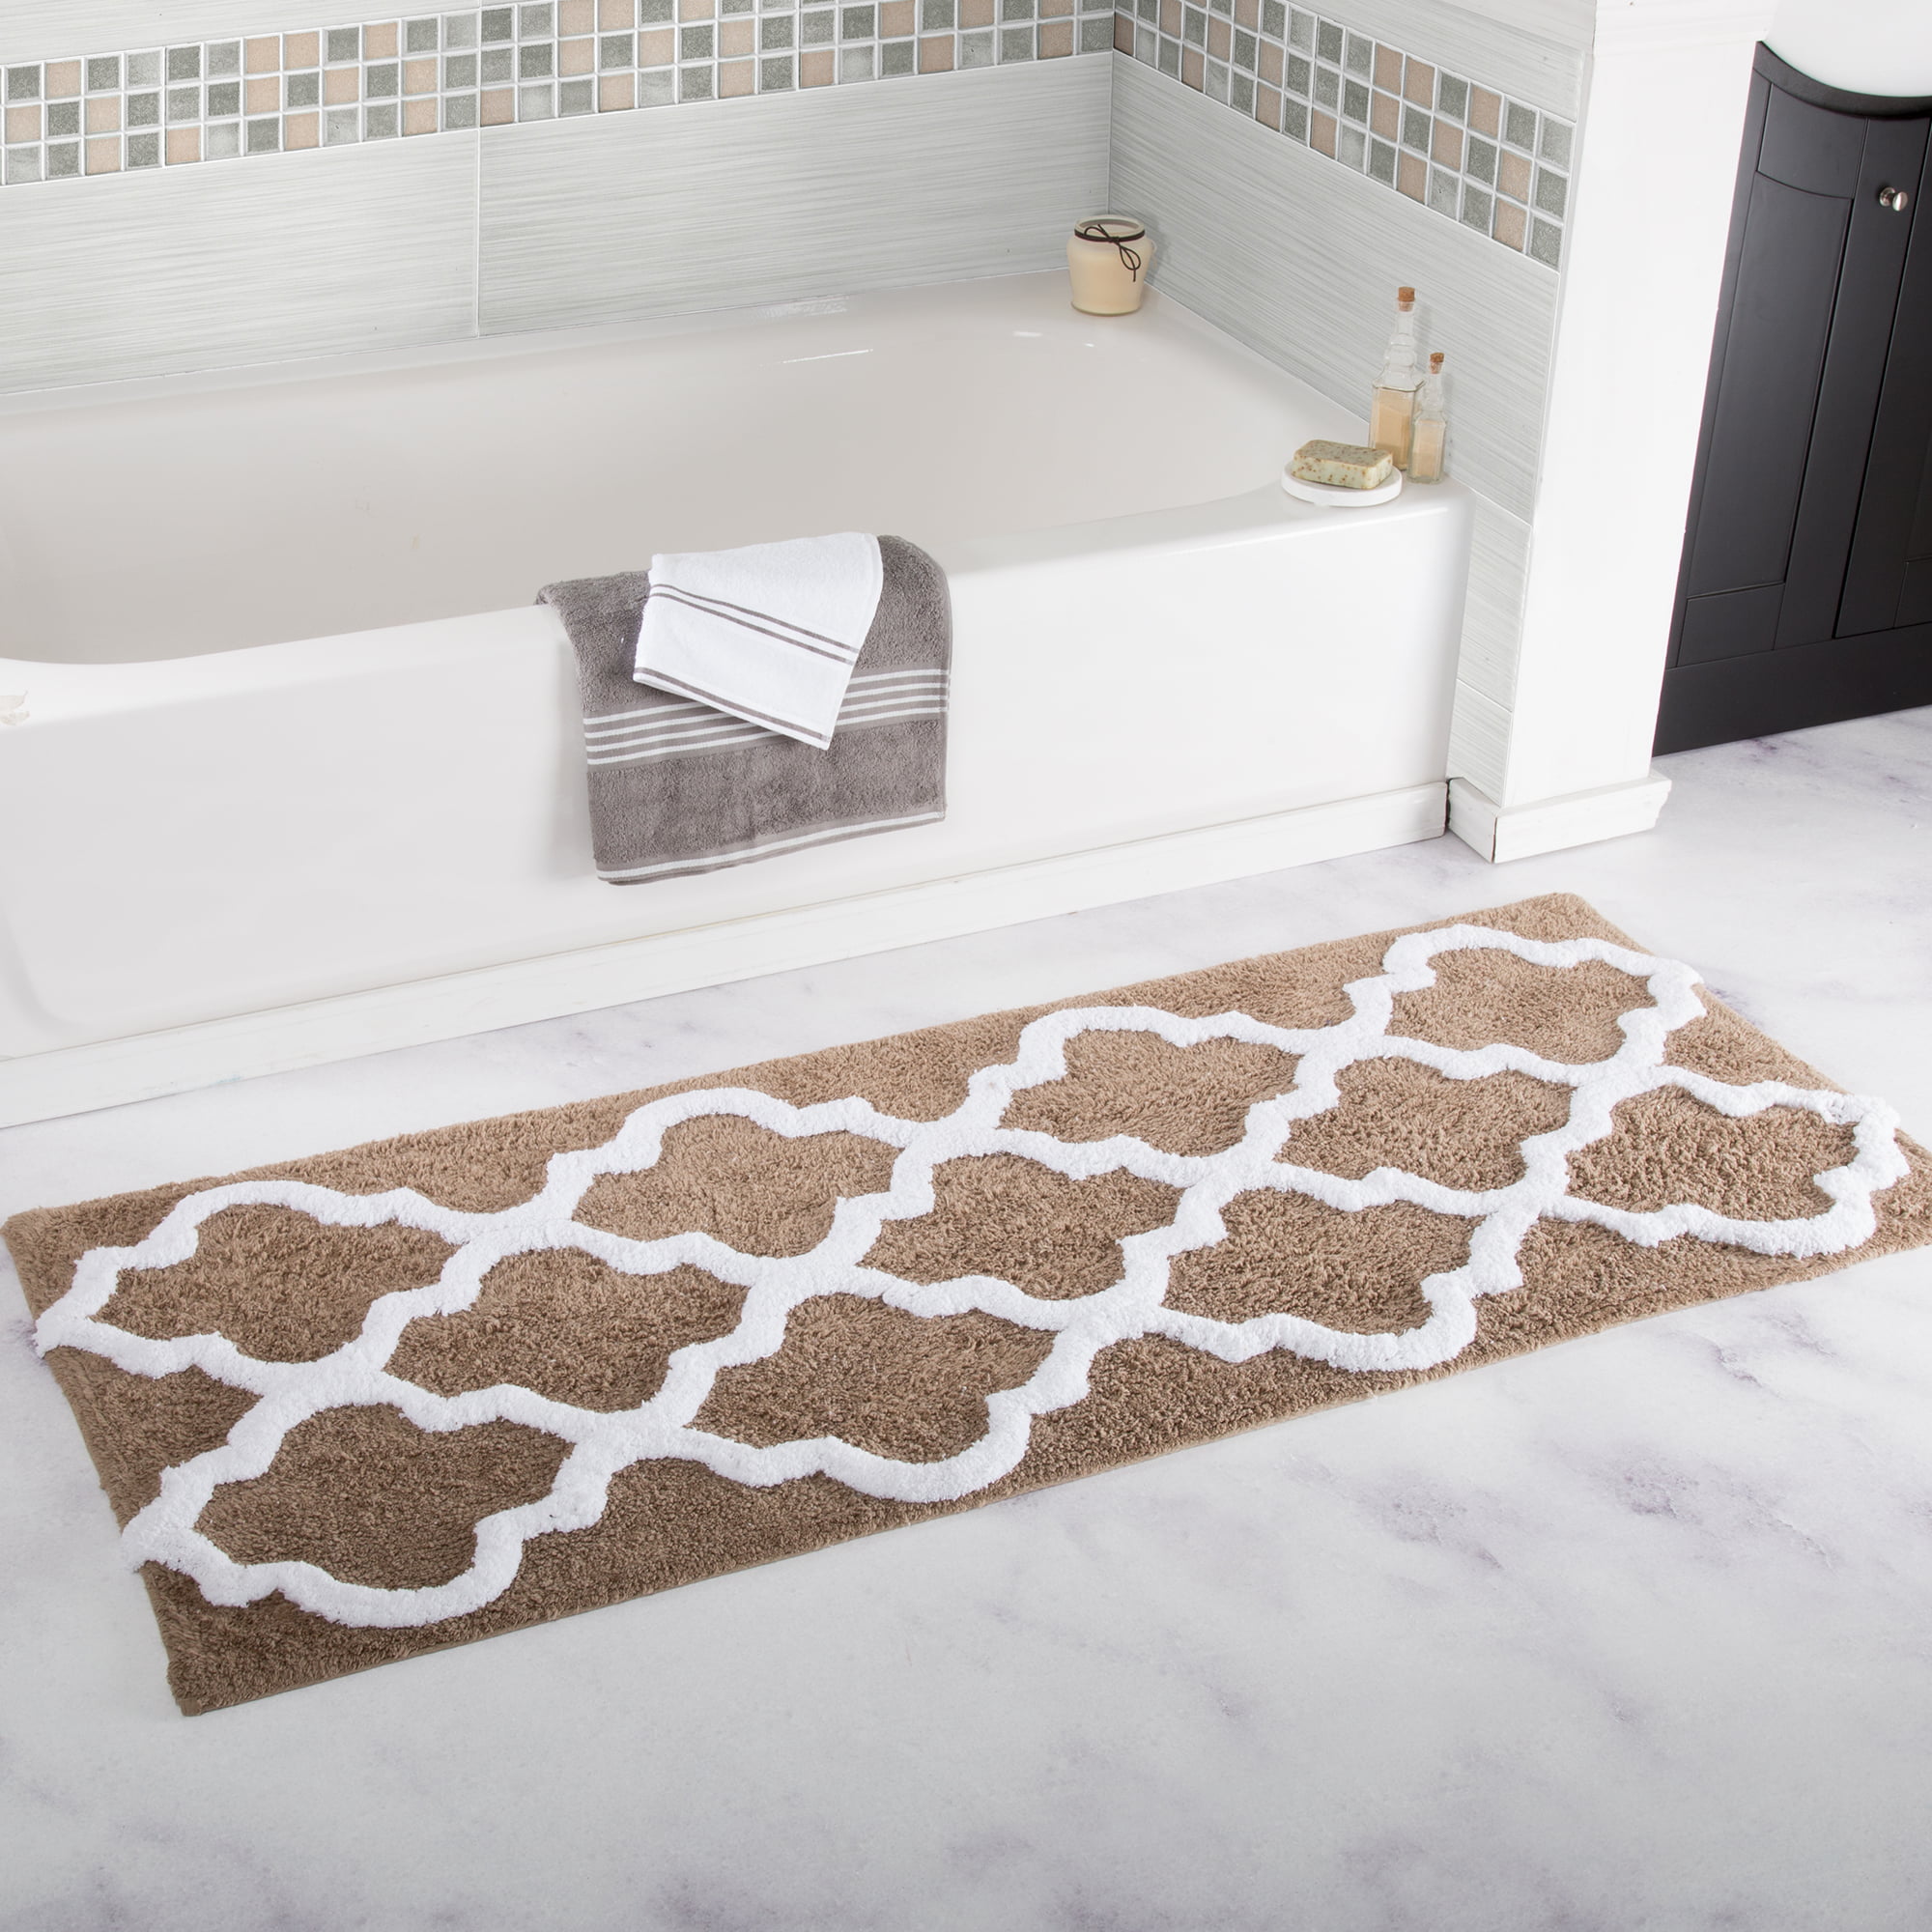 Details about   Whitley Willows Reversible Cotton Bath Mat and Runner Set 